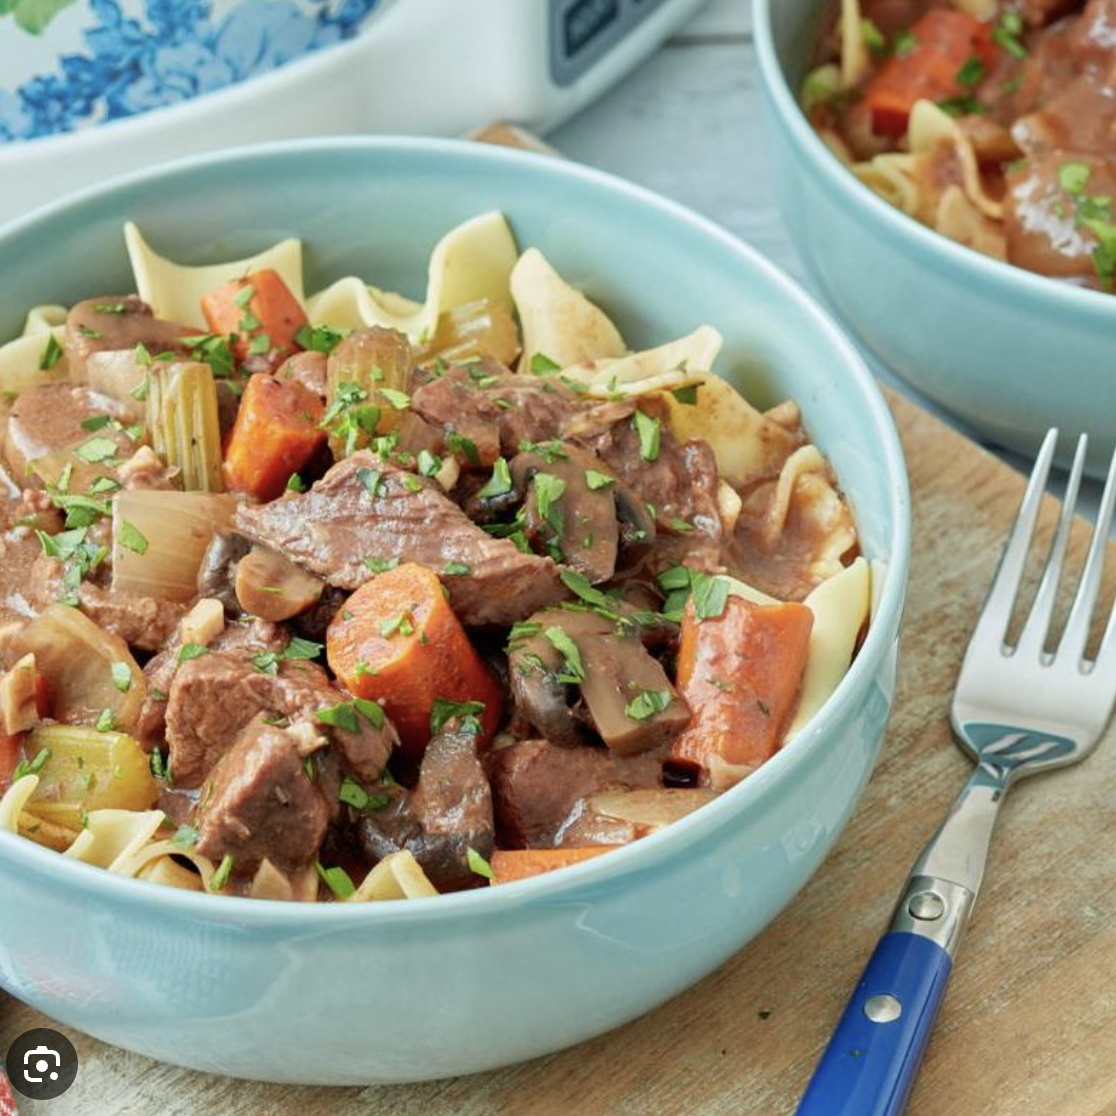 https://hips.hearstapps.com/hmg-prod/images/slow-cooker-beef-stew-65958c3fc0a5b.png